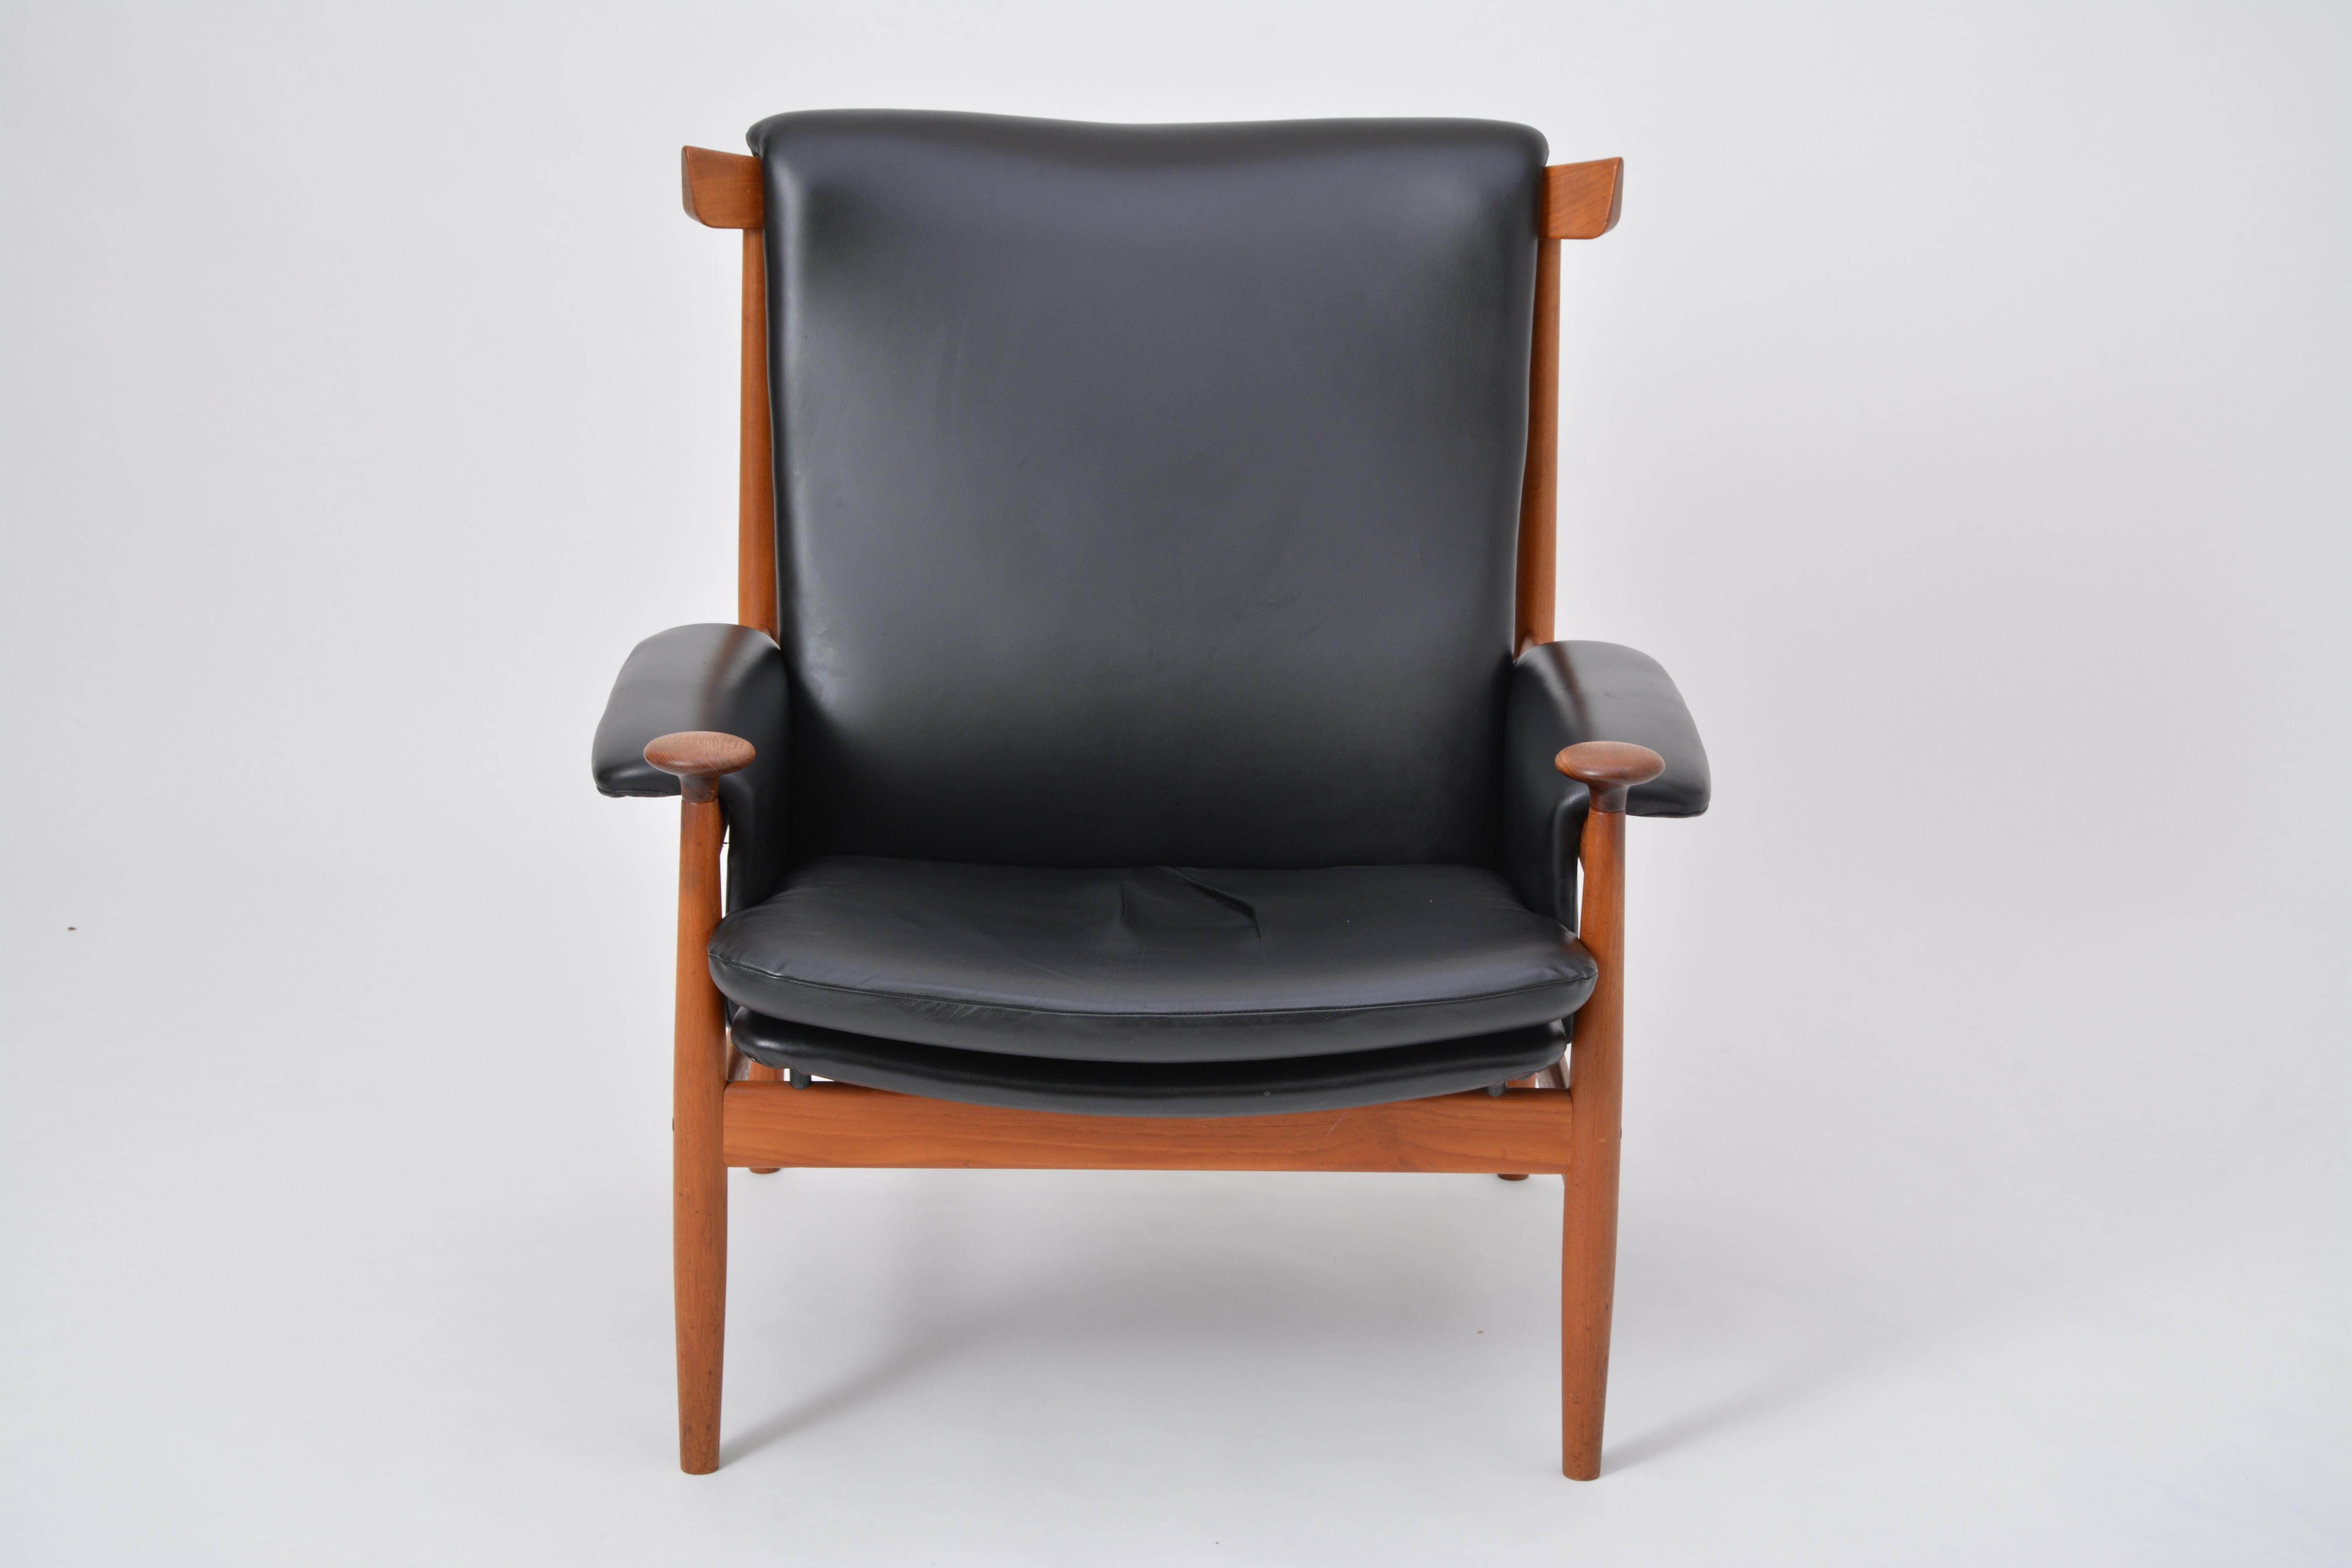 'Bwana' chair by Finn Juhl for France & Sons in teak wood and reupholstered in black leather. Very good vintage condition. The 